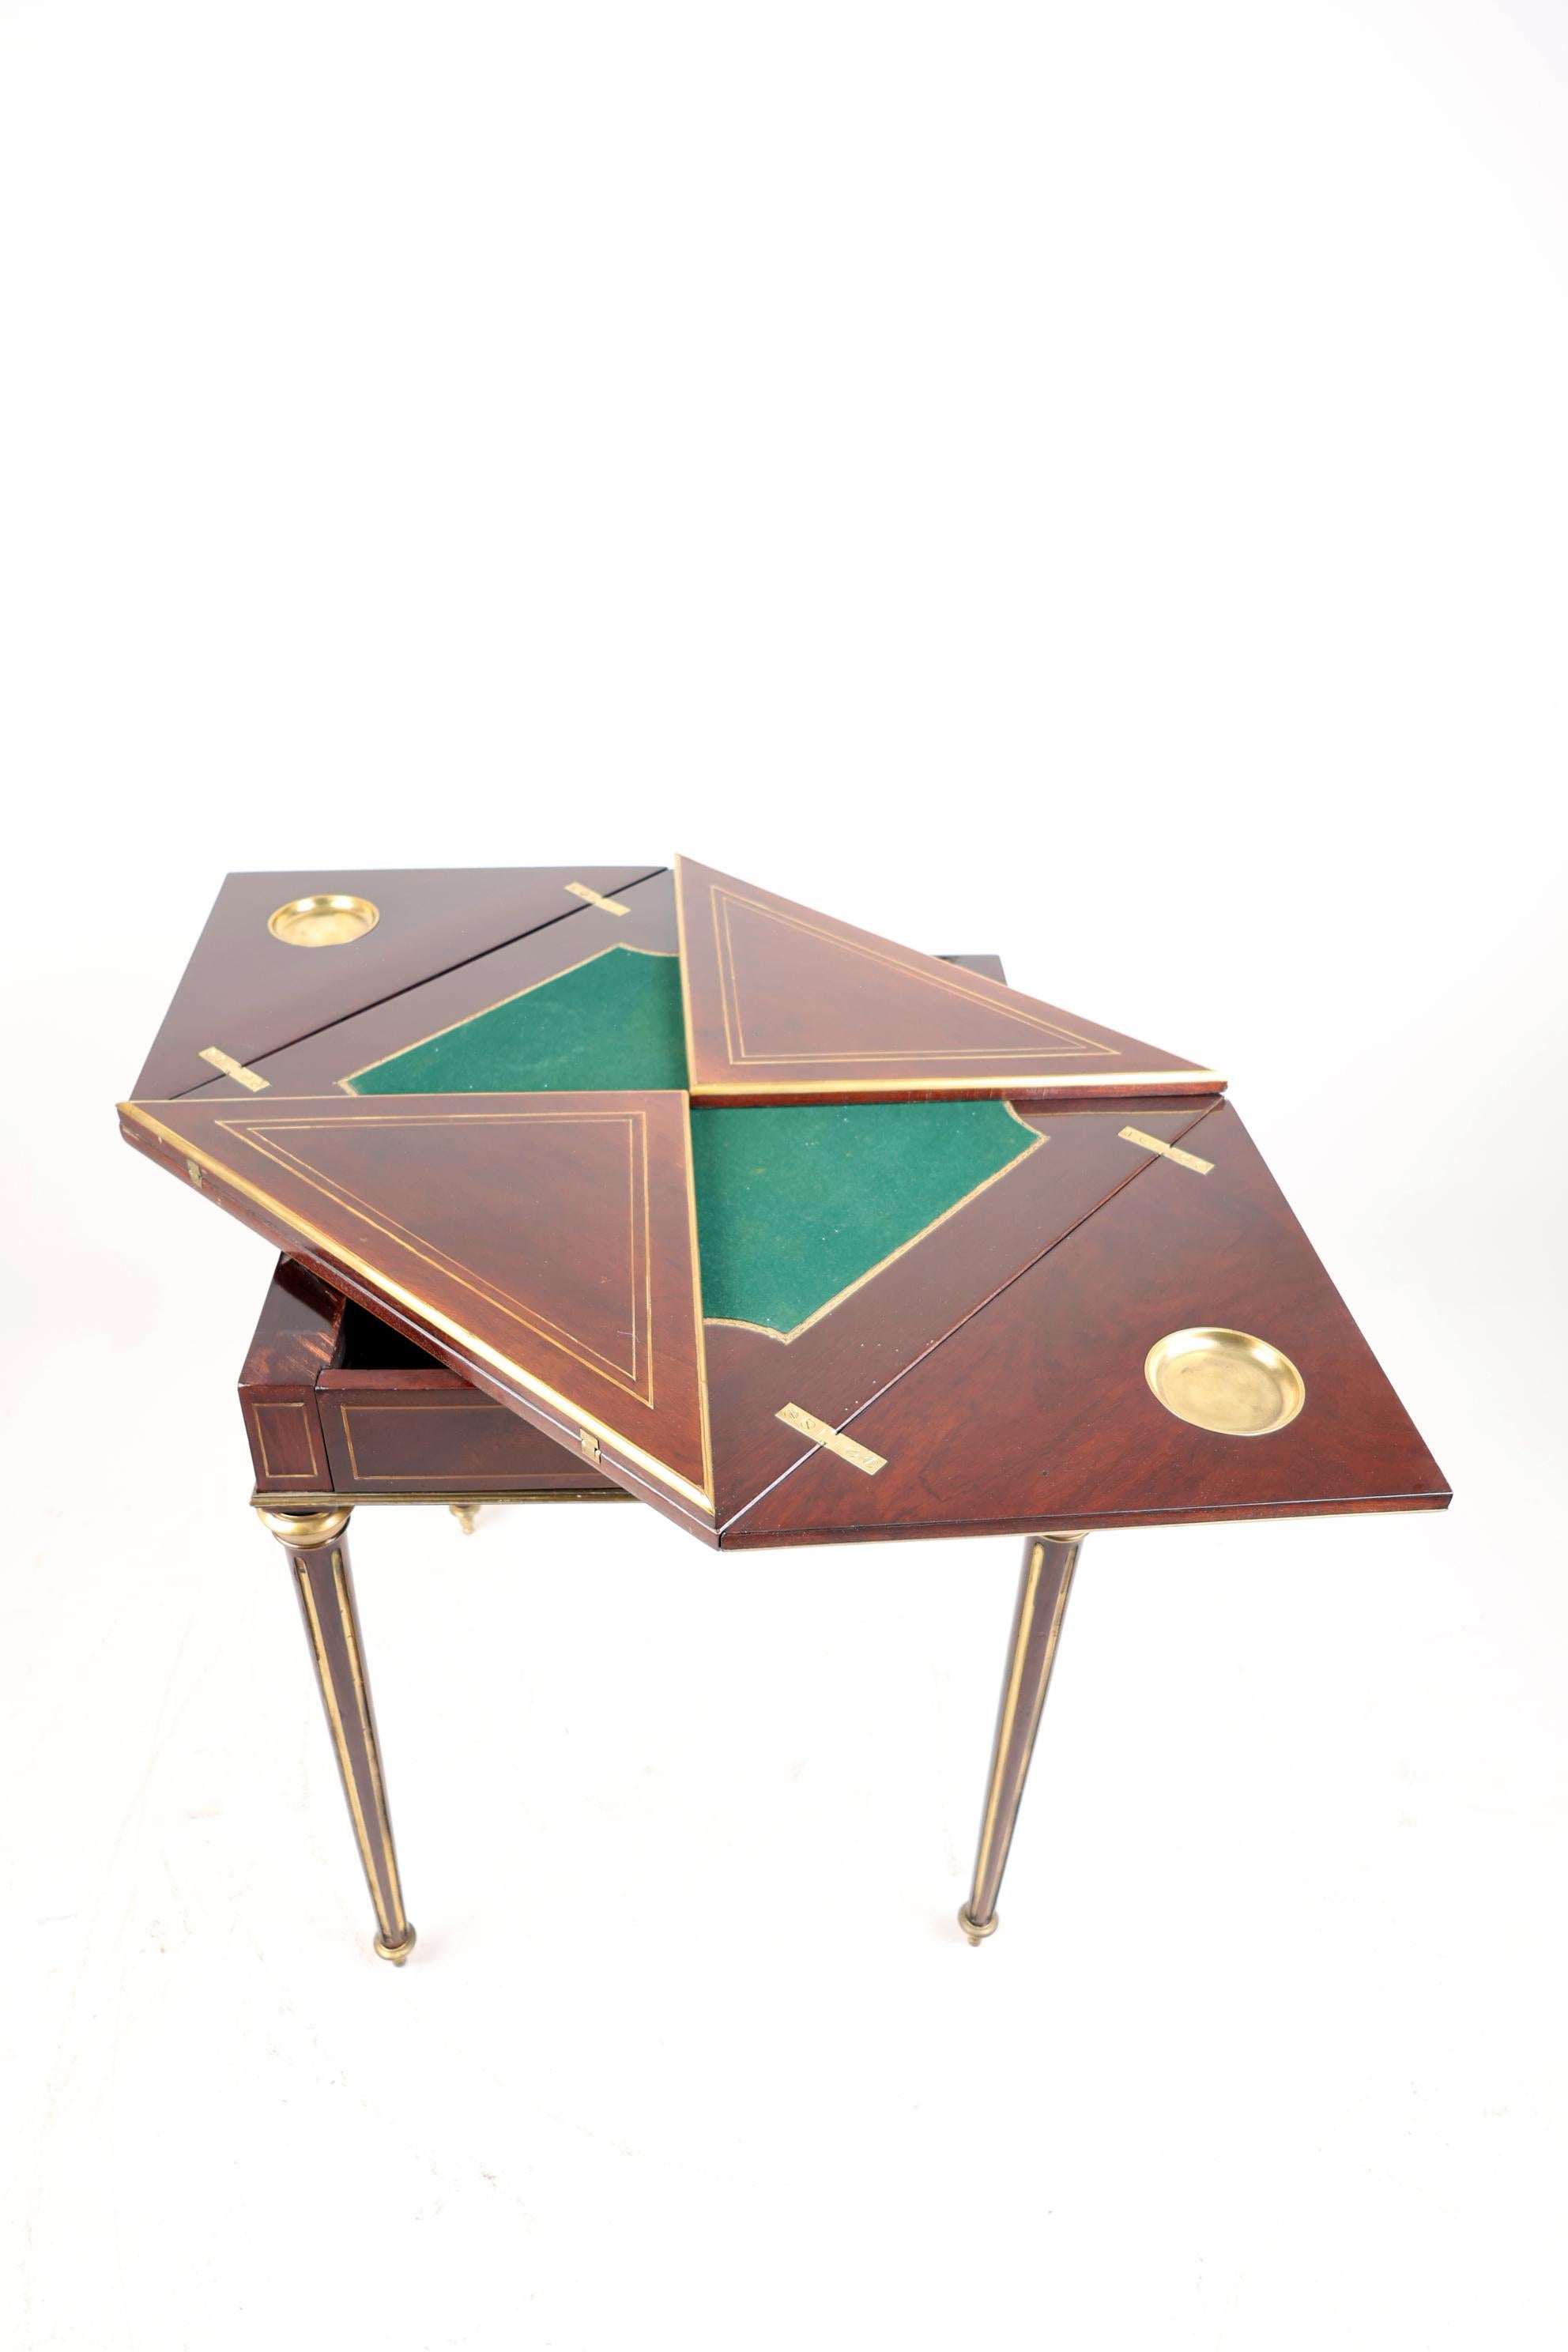 Late 19th Century Mahogany Envelope Card Table For Sale